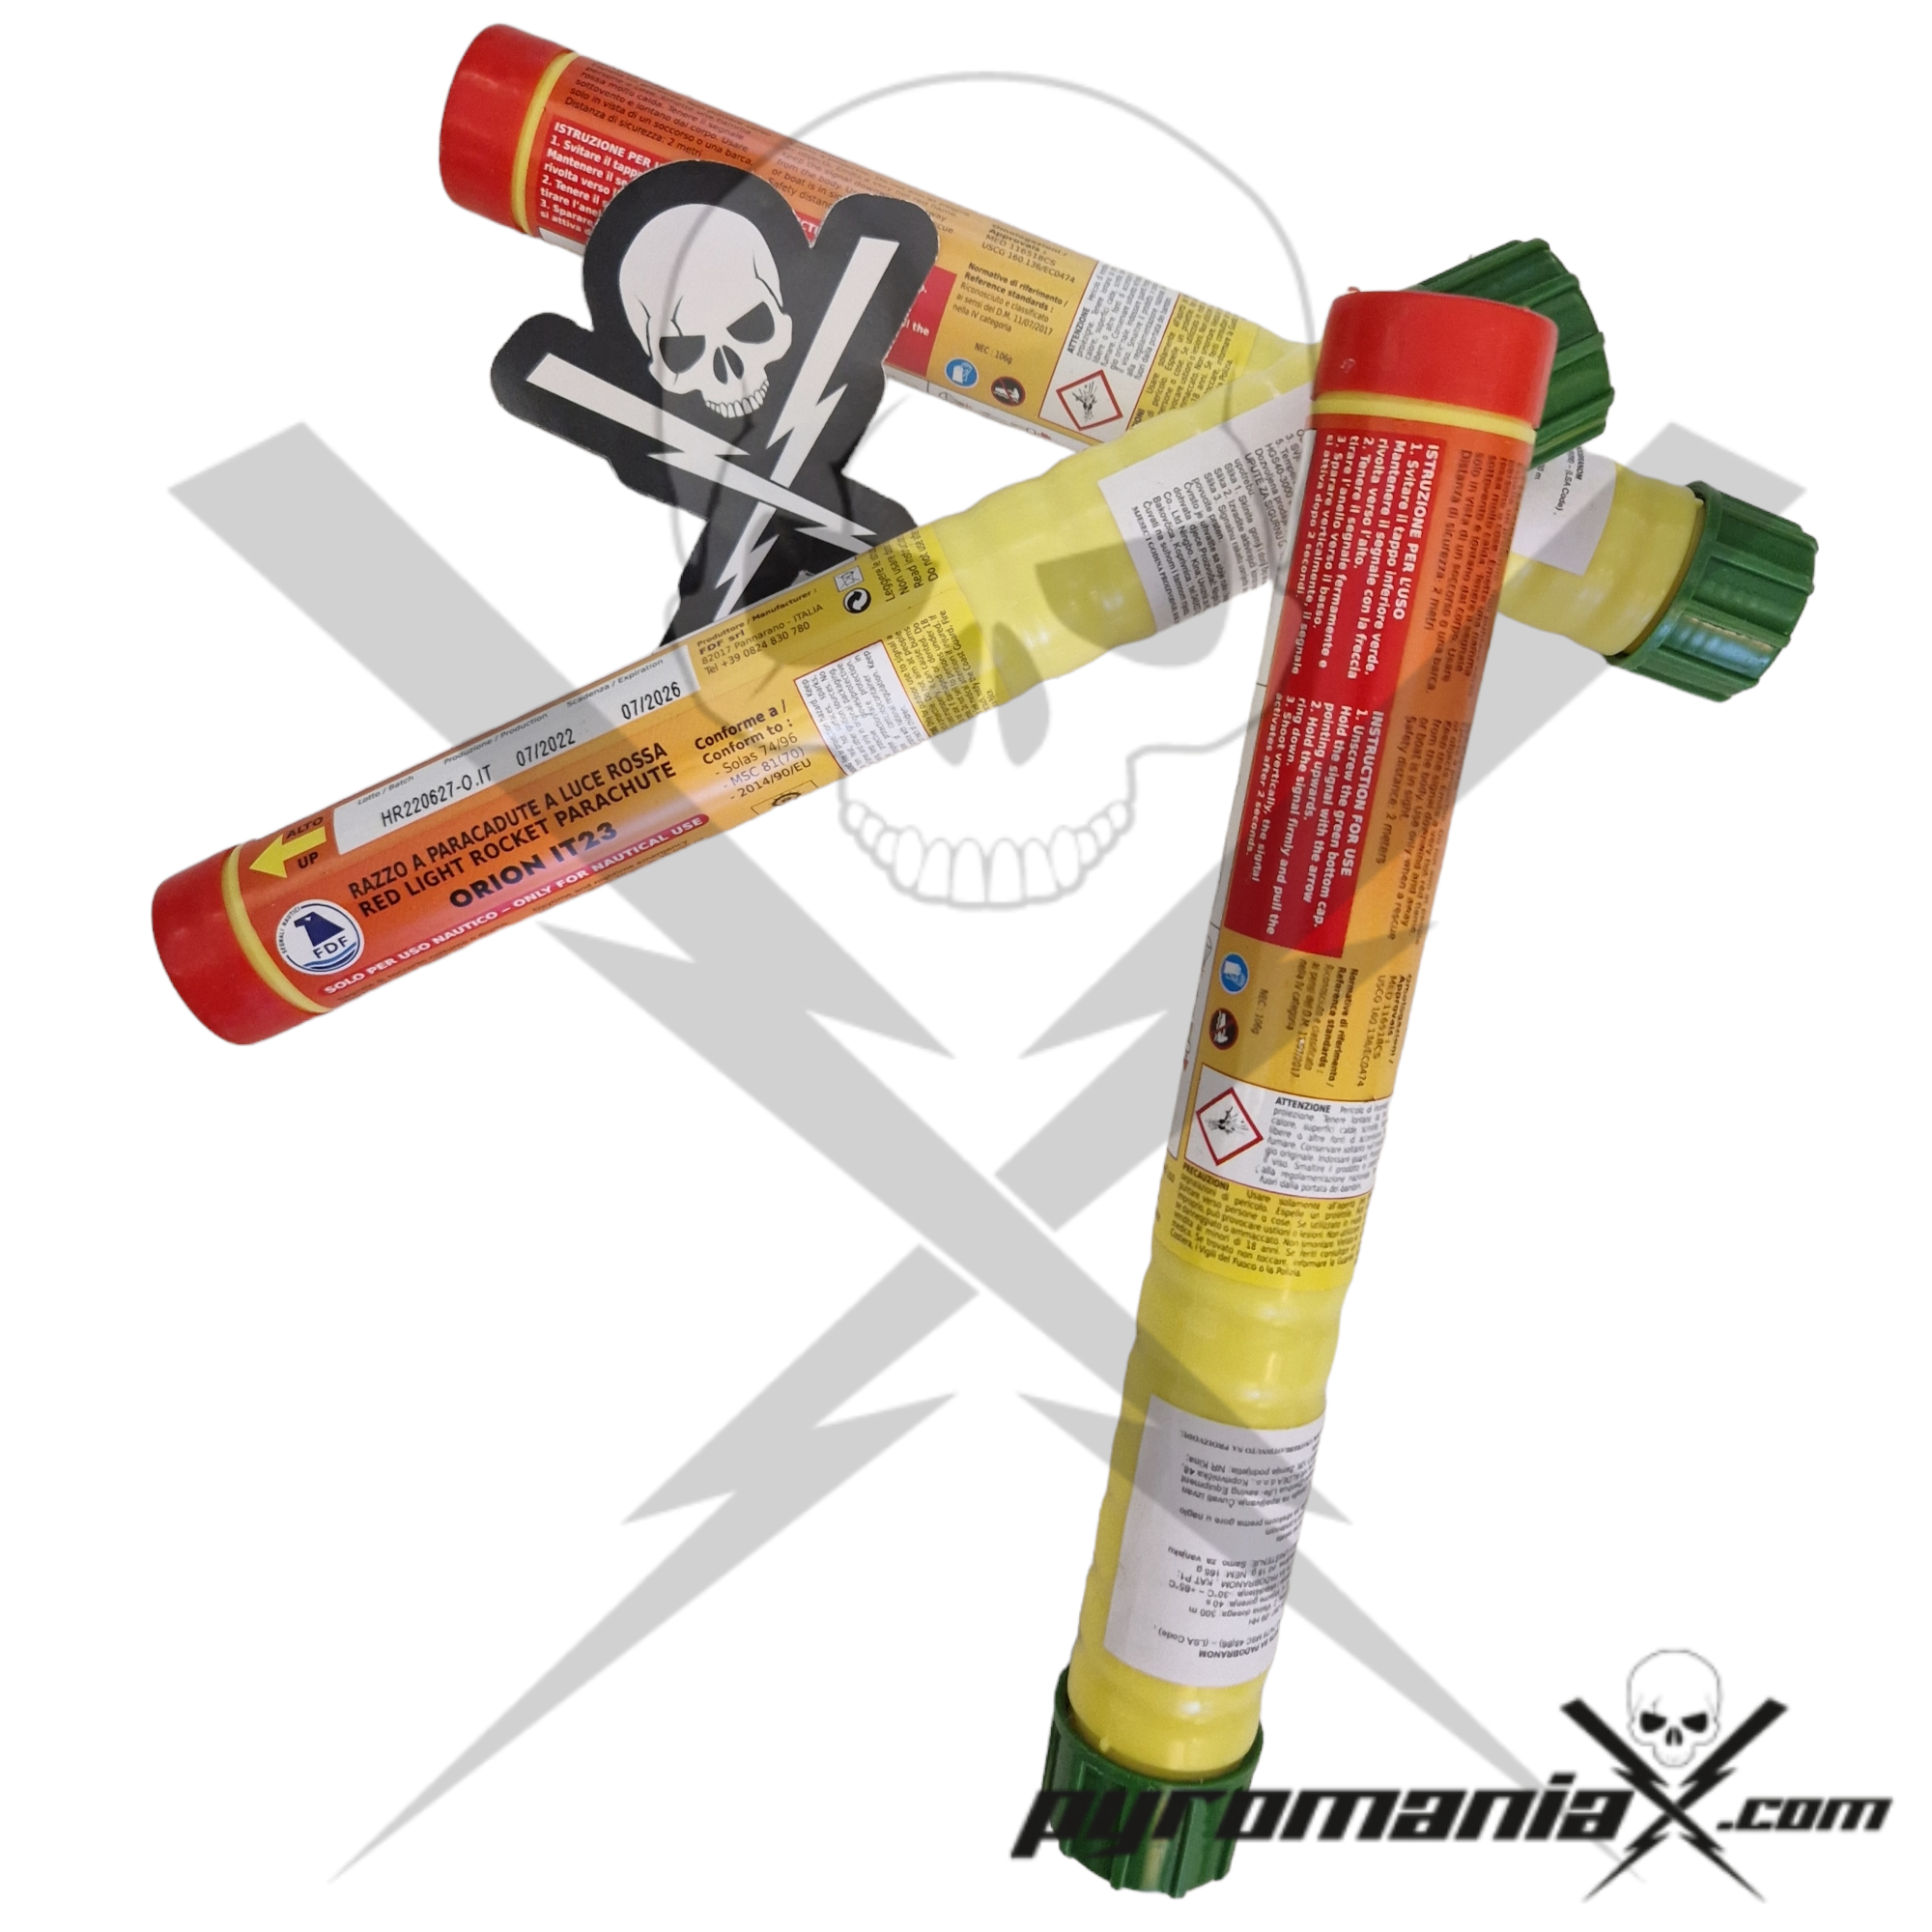 Flare Kit Consisting of 3 CIL/Orion Red Rocket PM$ Parachute